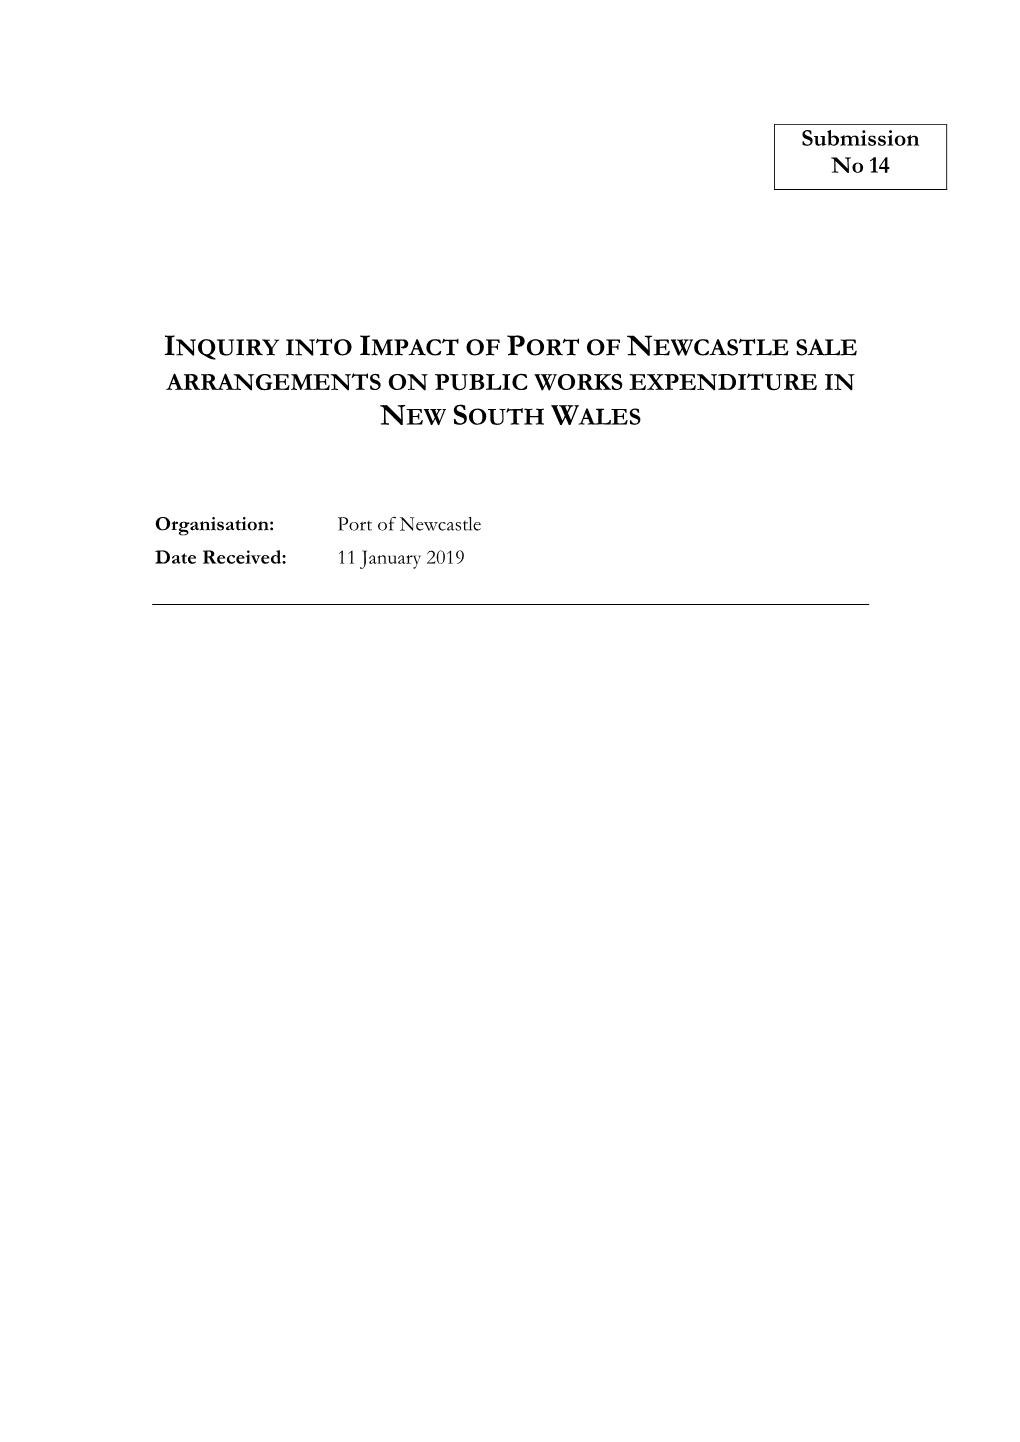 Submission No 14 INQUIRY INTO IMPACT of PORT of NEWCASTLE SALE ARRANGEMENTS on PUBLIC WORKS EXPENDITURE in NEW SOUTH WALES